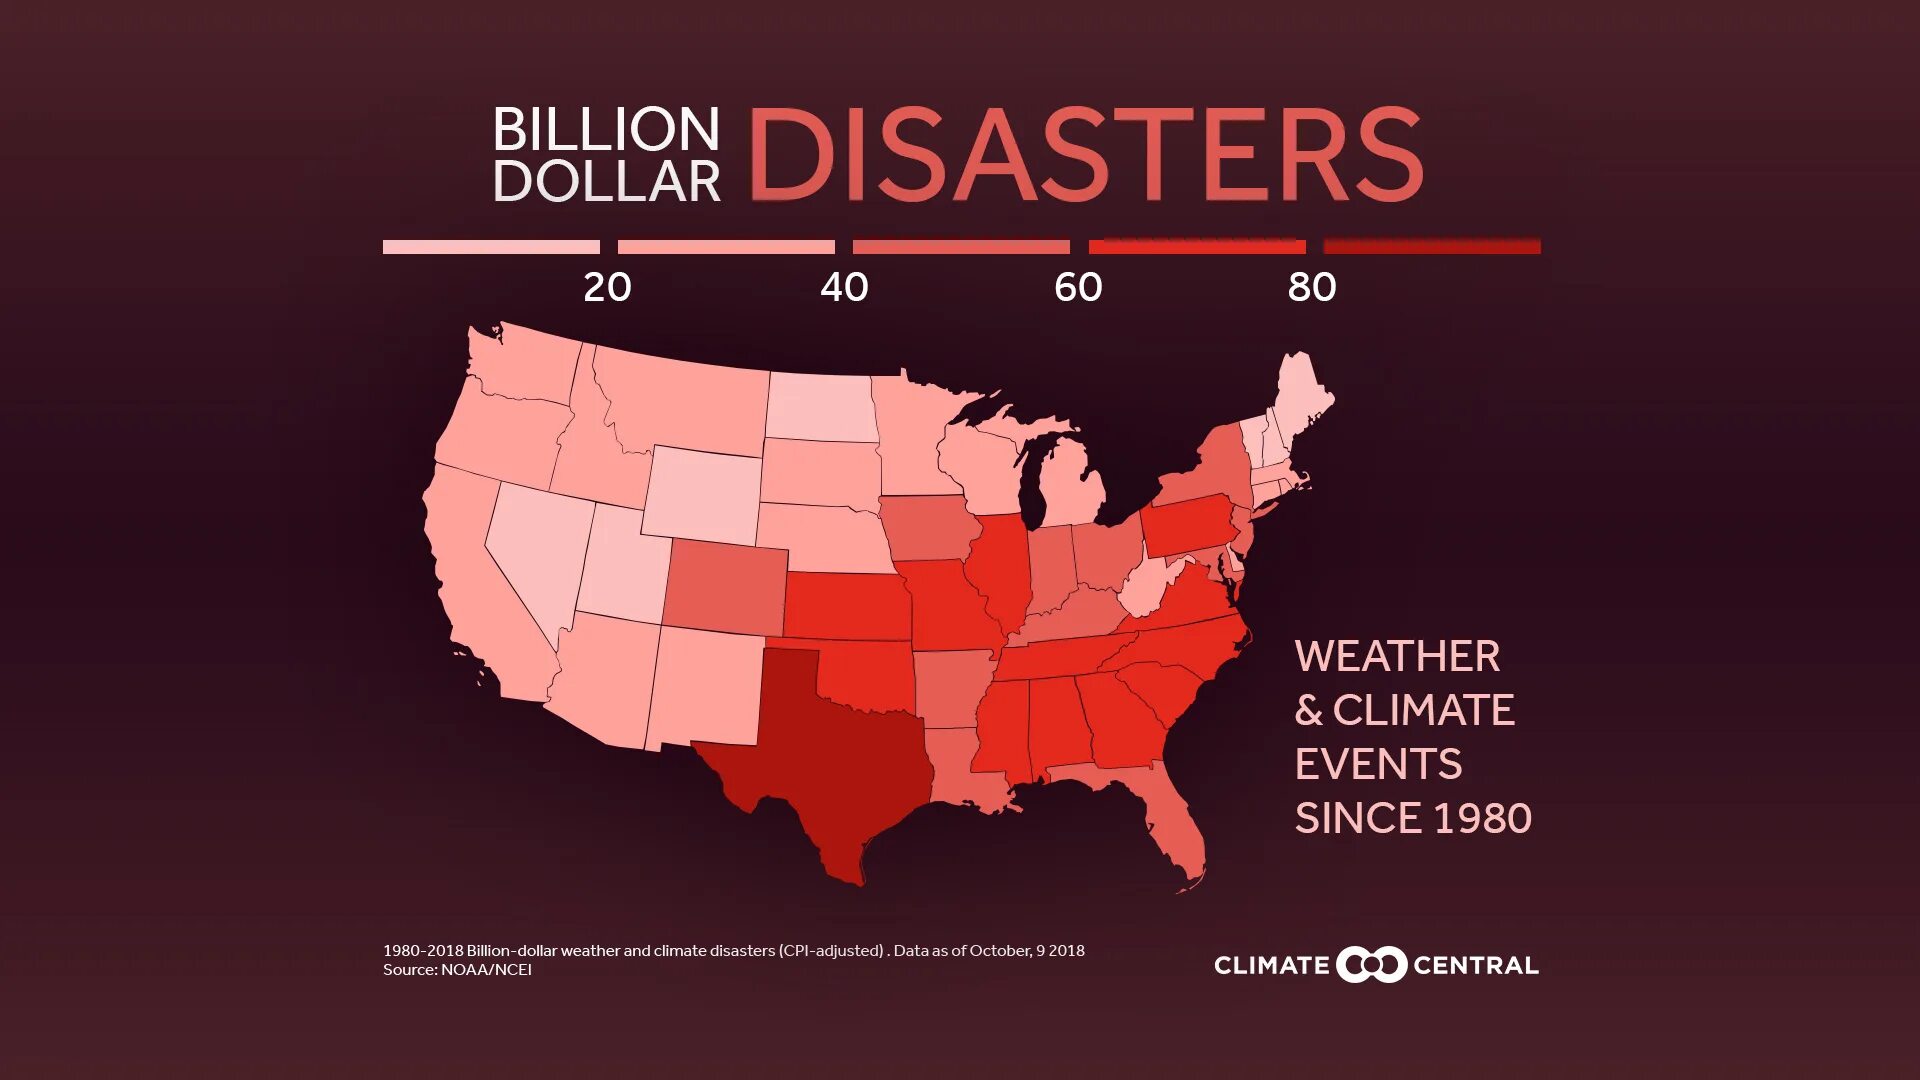 Биллион. Climate Disasters. Disasters and extreme weather events. 44411111111 Billion.